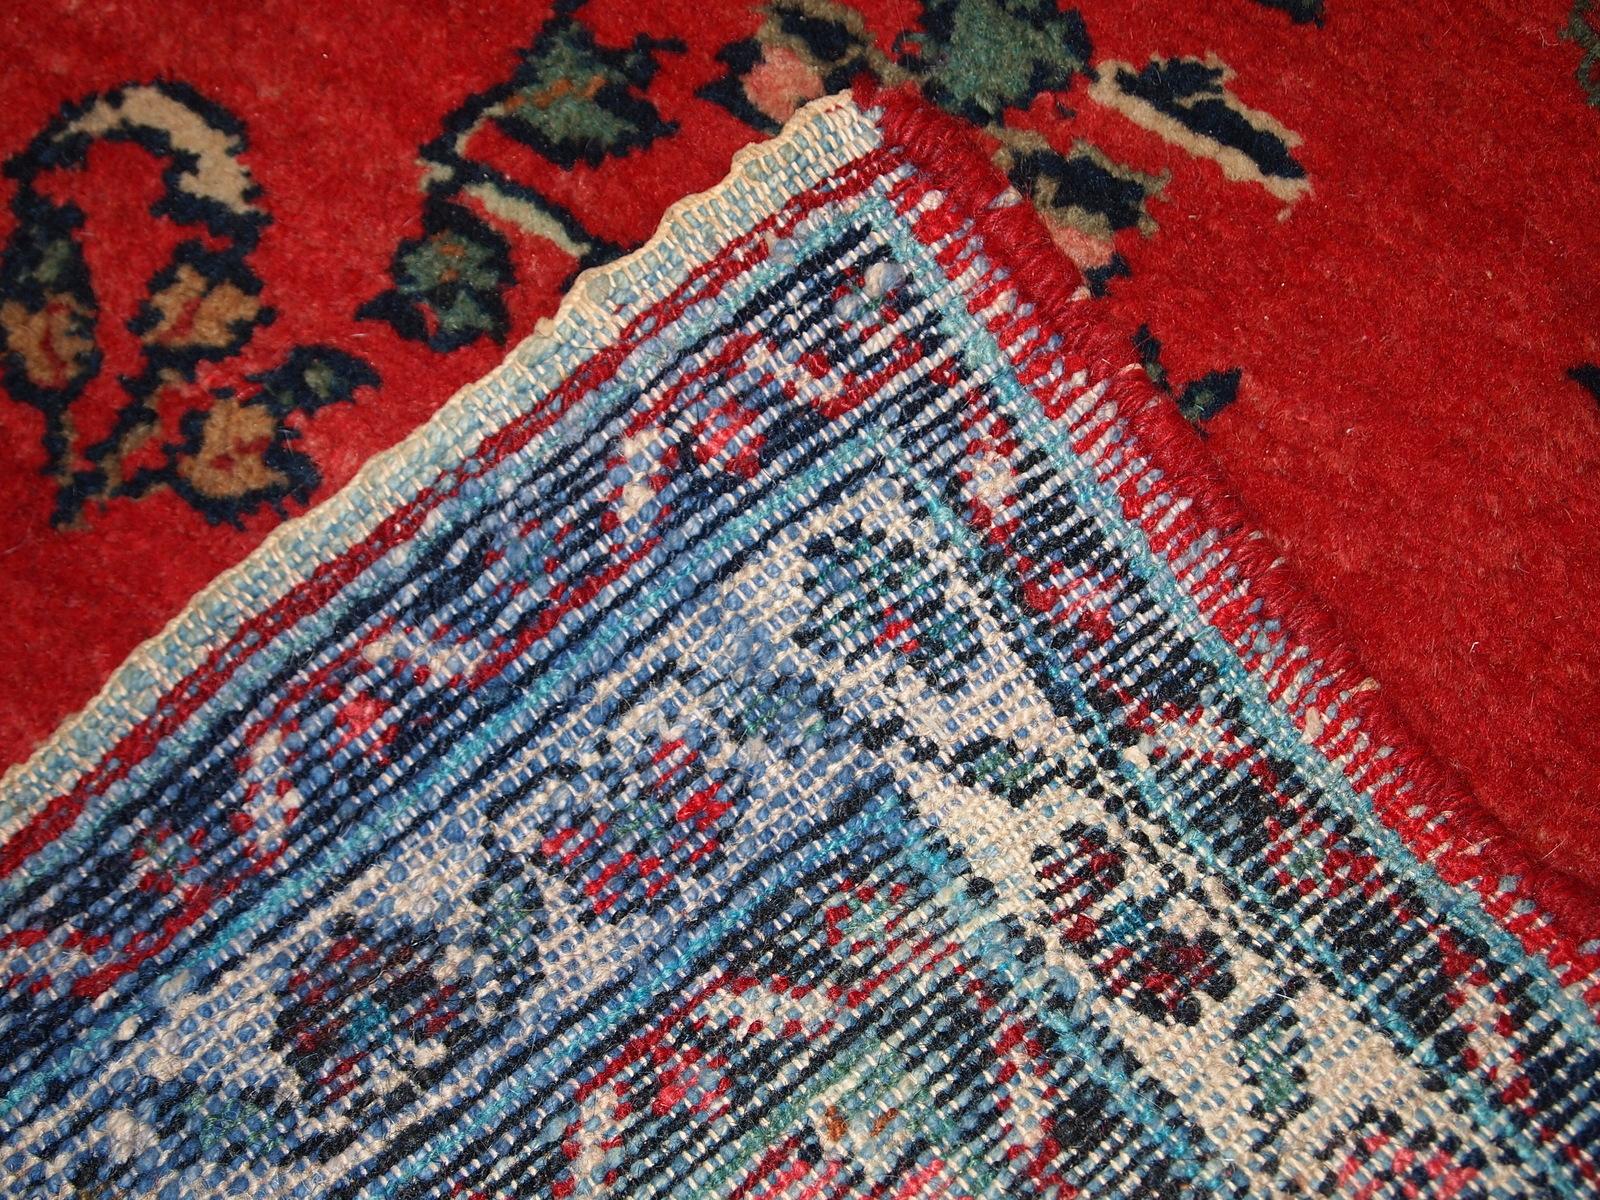 Handmade vintage Hamadan runner in red wool. This rug has been made in the middle of 20th century in Middle East region.

-condition: original good,

-circa 1960s,

-size: 2.6' x 6.3' (81cm x 194cm),

-material: wool,

-country of origin: